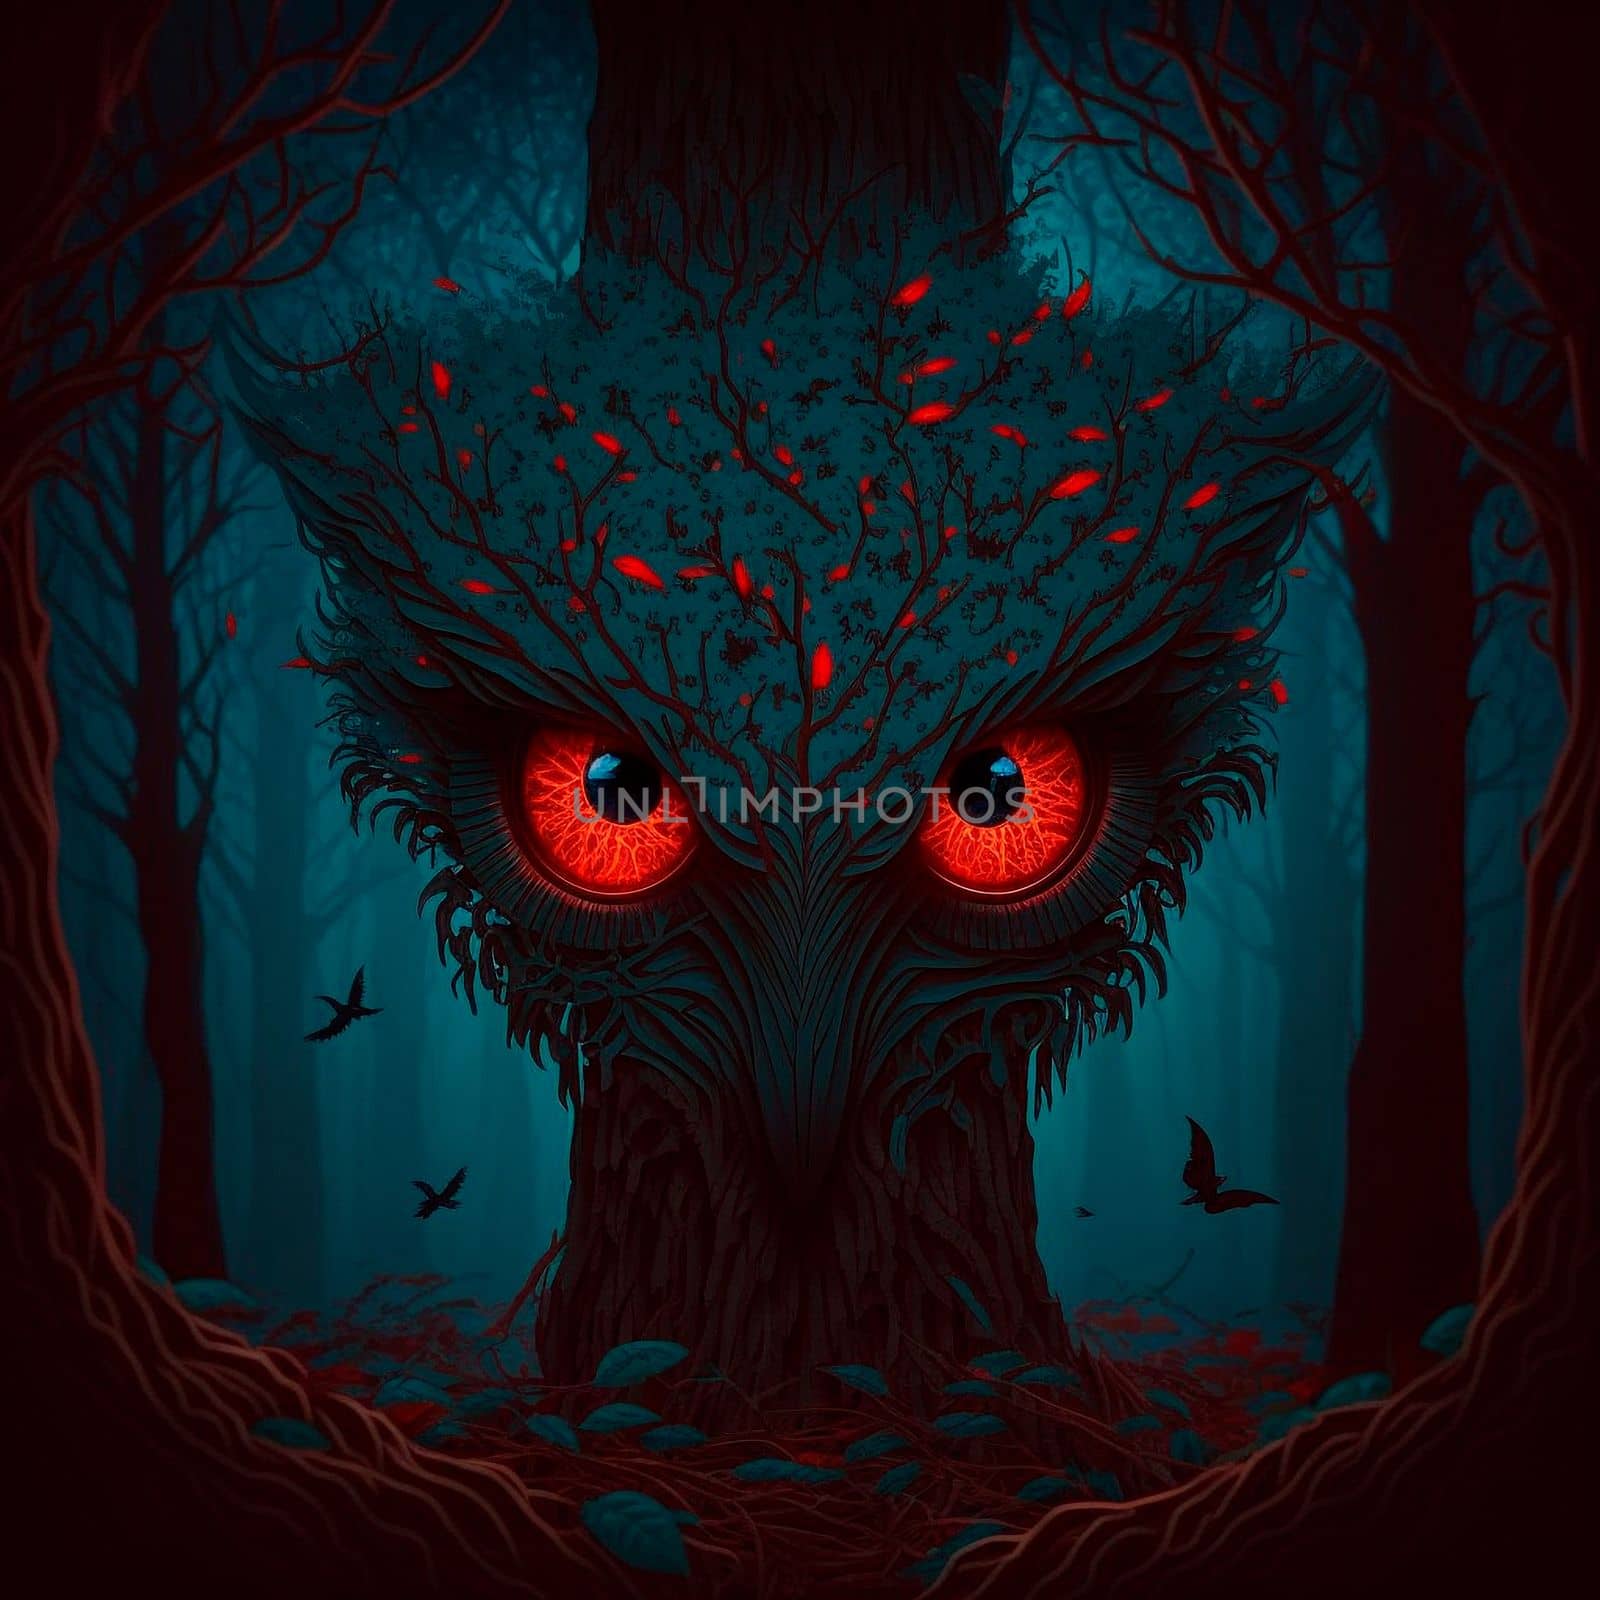 A big monster with red eyes in a mystical forest. High quality illustration